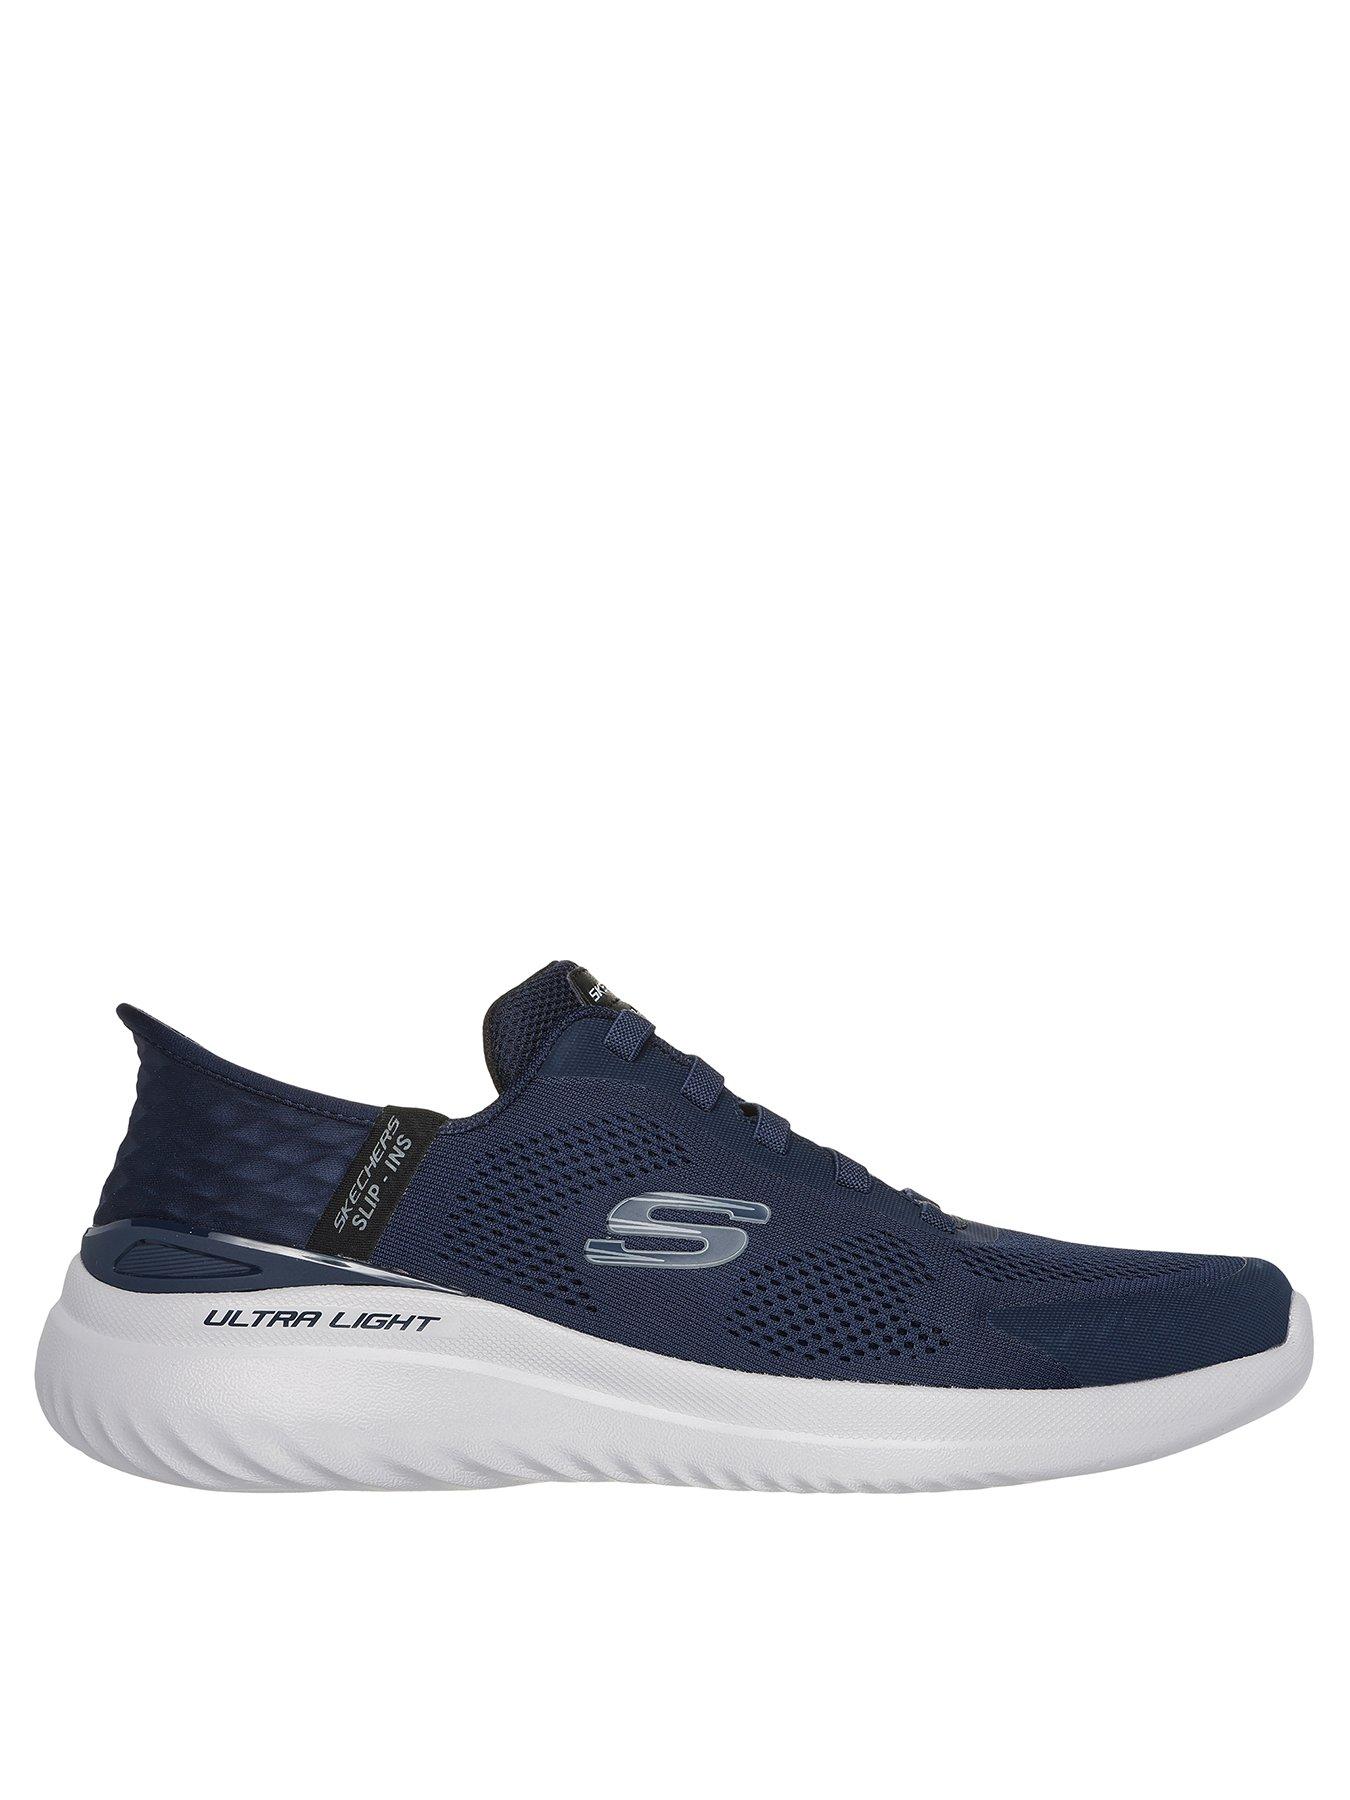 SKECHERS - Let's go walk! 20% OFF GO WALK shoes and pants with